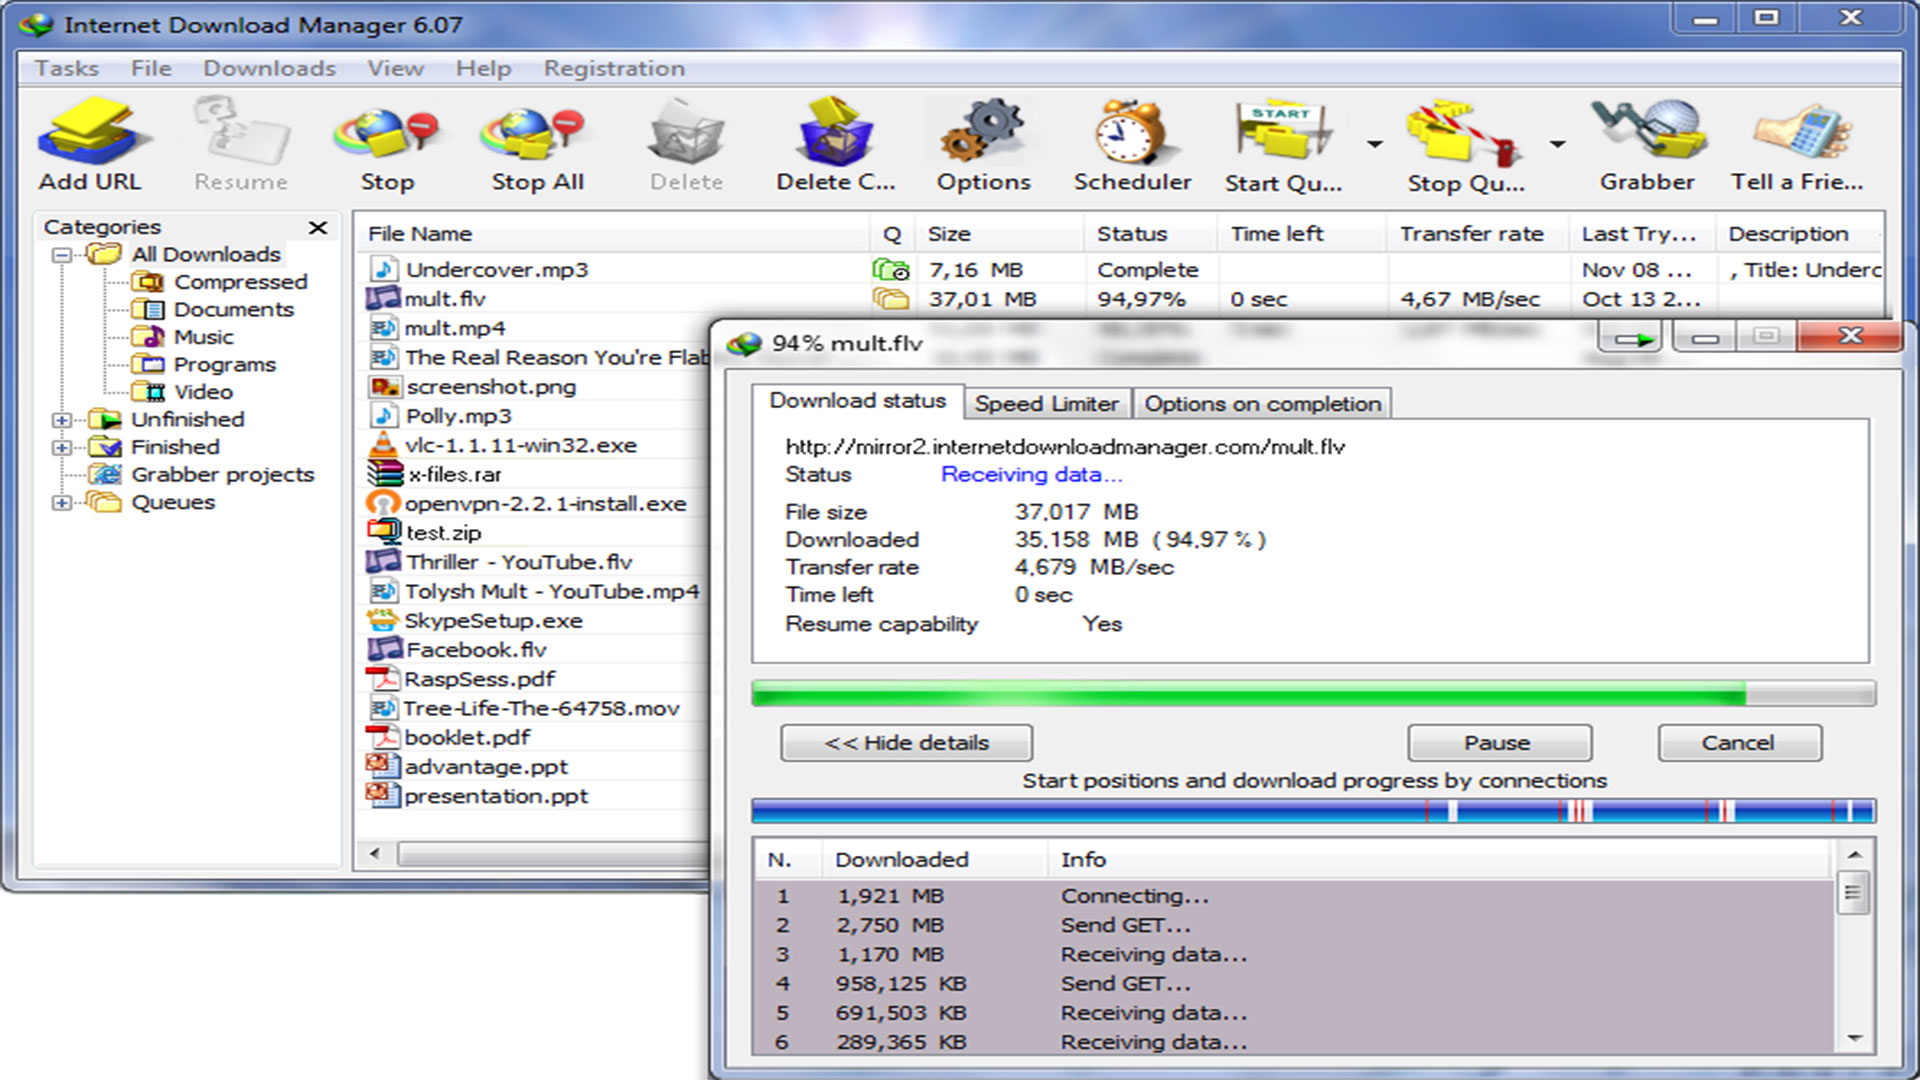 Microsoft Download Manager pc